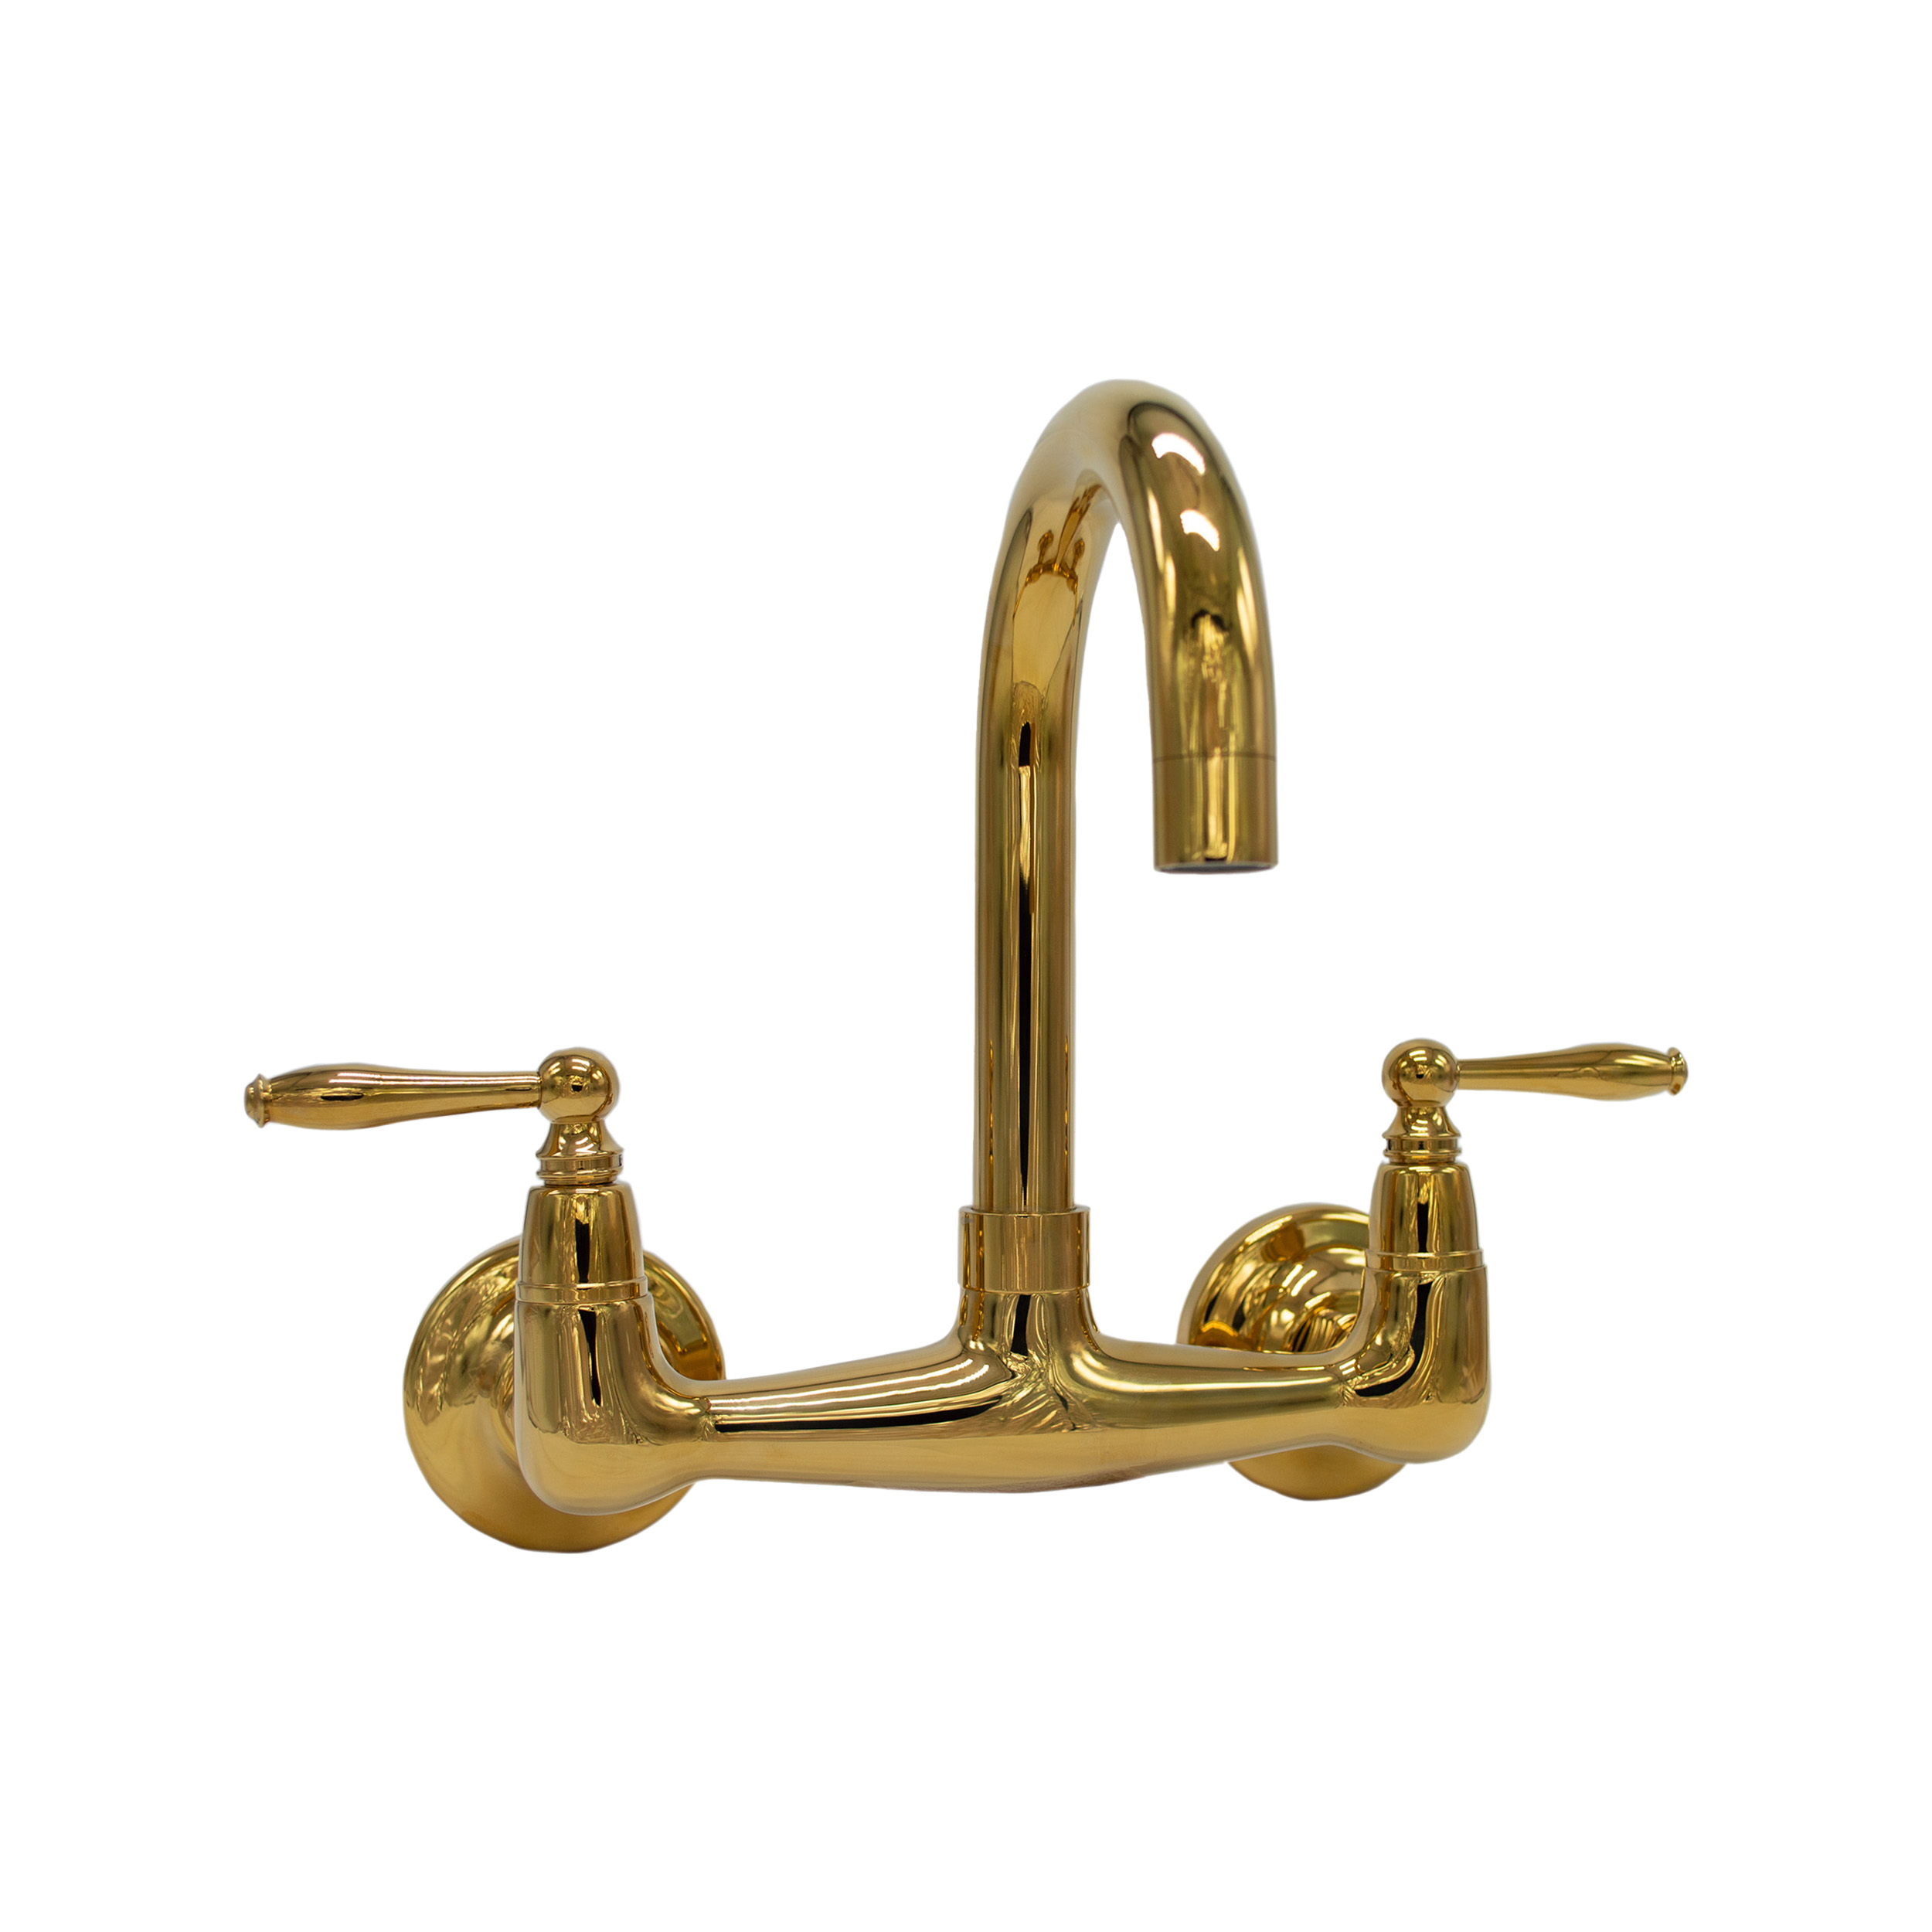 Short Reach Wall Mount Faucet with 6 Swivel Spout / Metal or Porcelain  Levers / Polished Brass Finish - NBI Drainboard Sinks